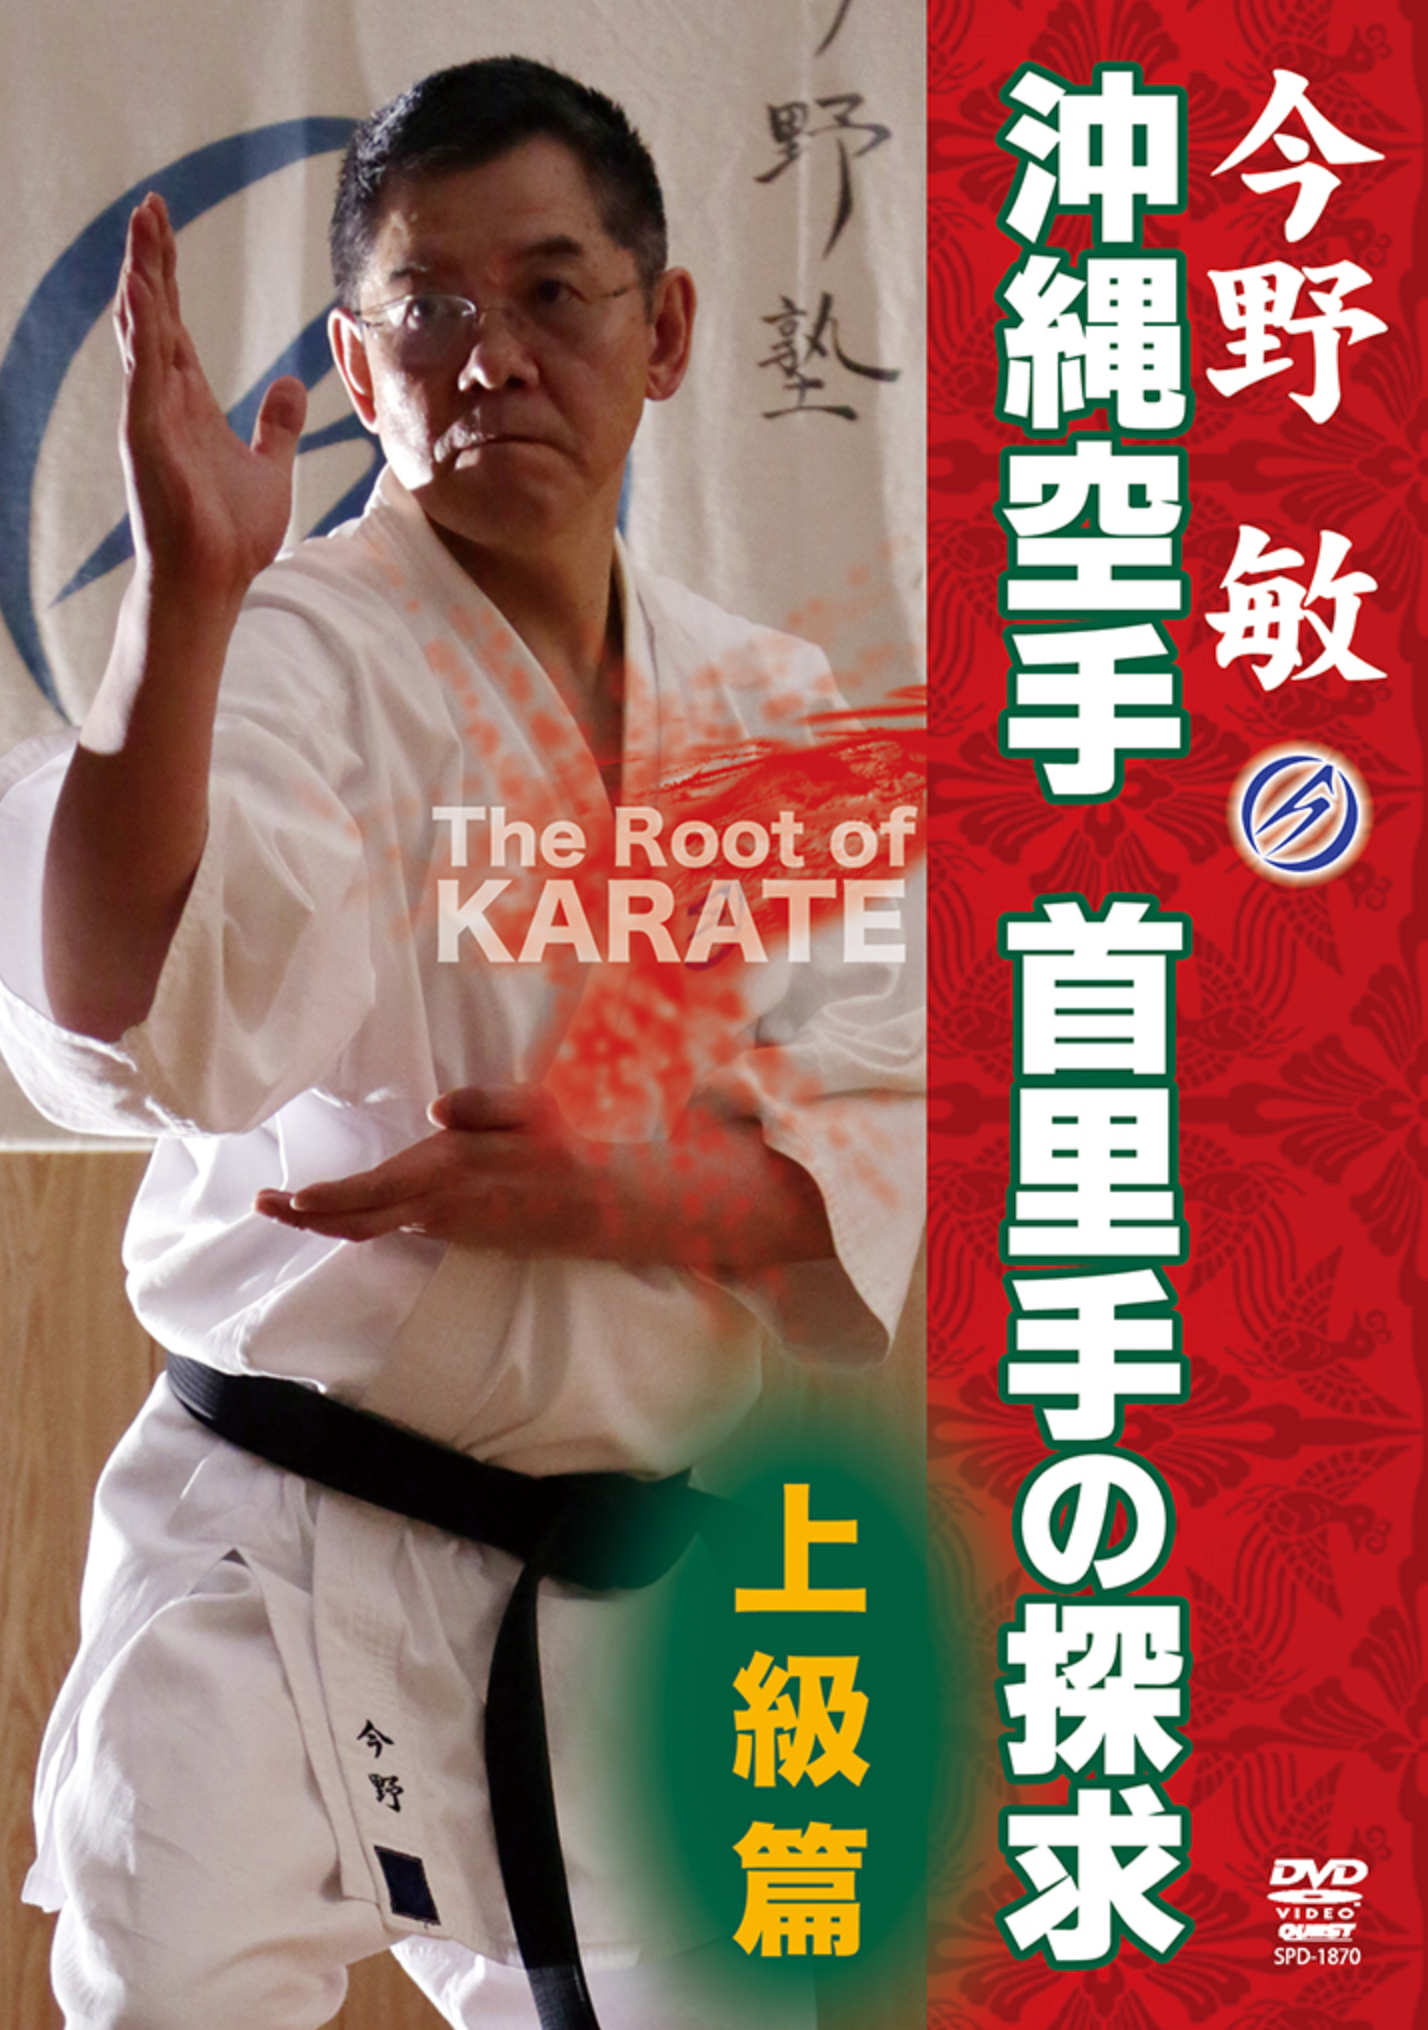 The Root of Karate DVD by Bin Konno - Budovideos Inc